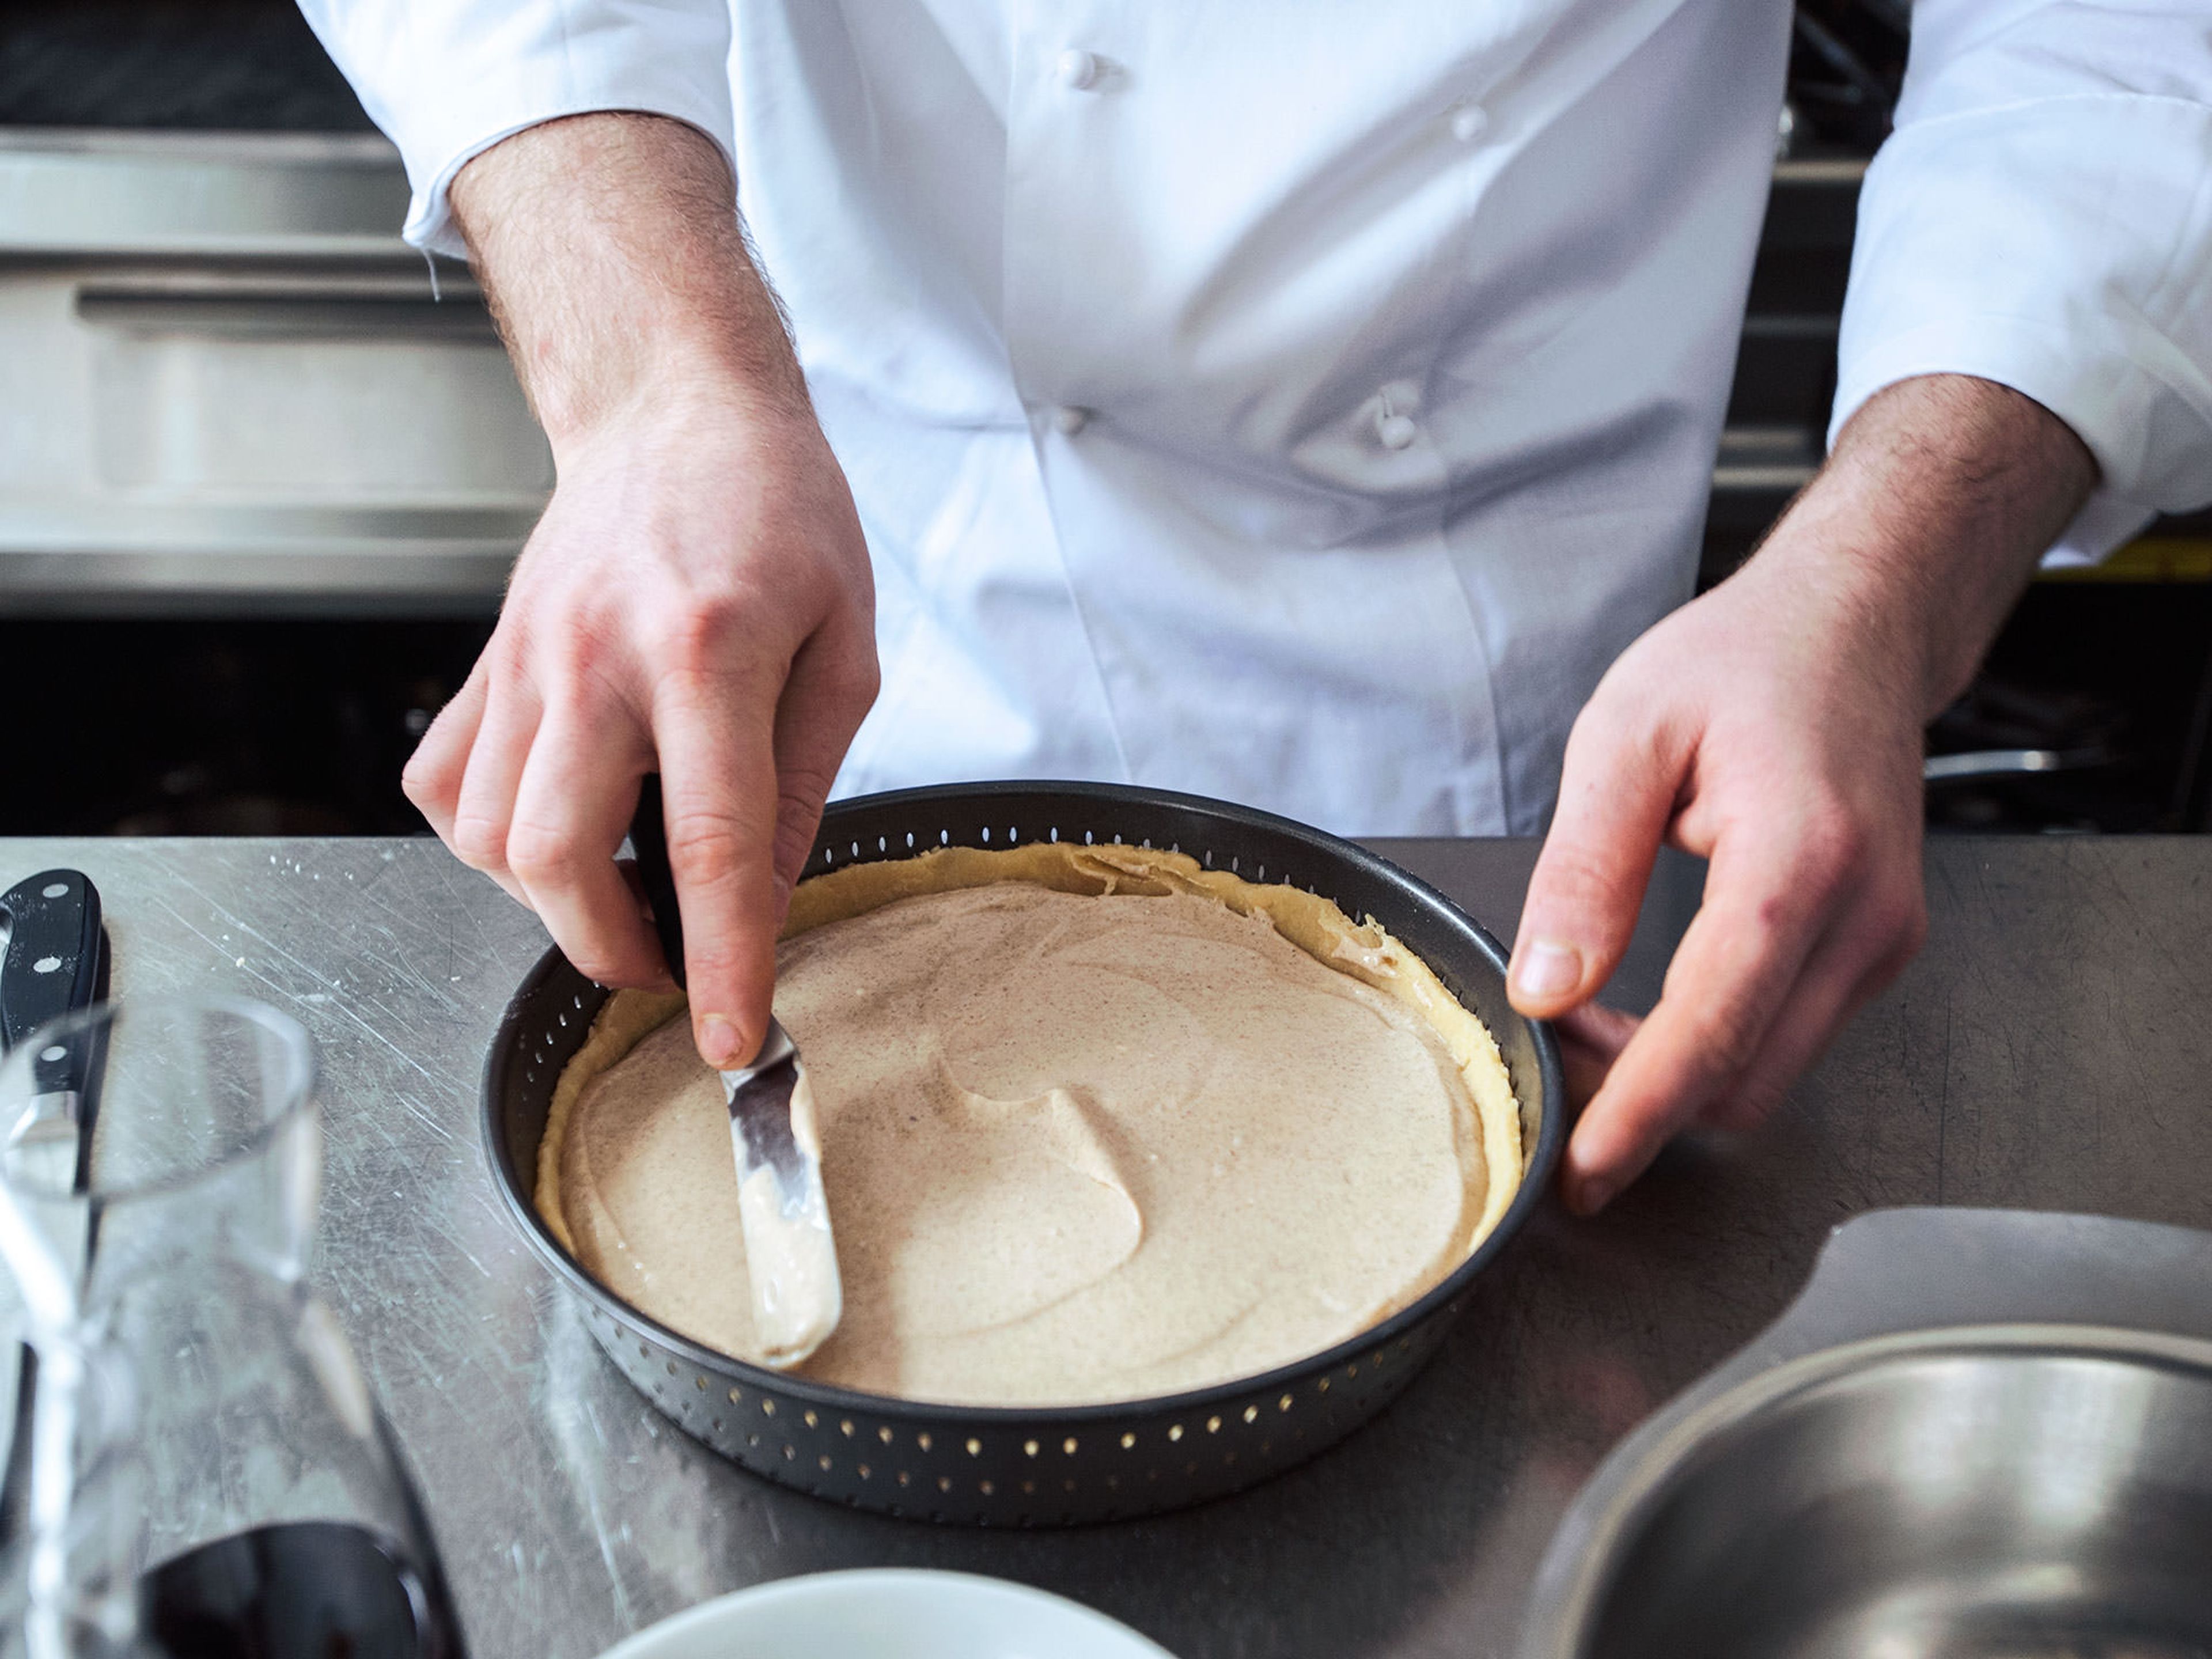 Spread sour cream filling evenly over the crust. Transfer pan to oven and bake at 180°C/350°F for approx. 20 – 30 min.